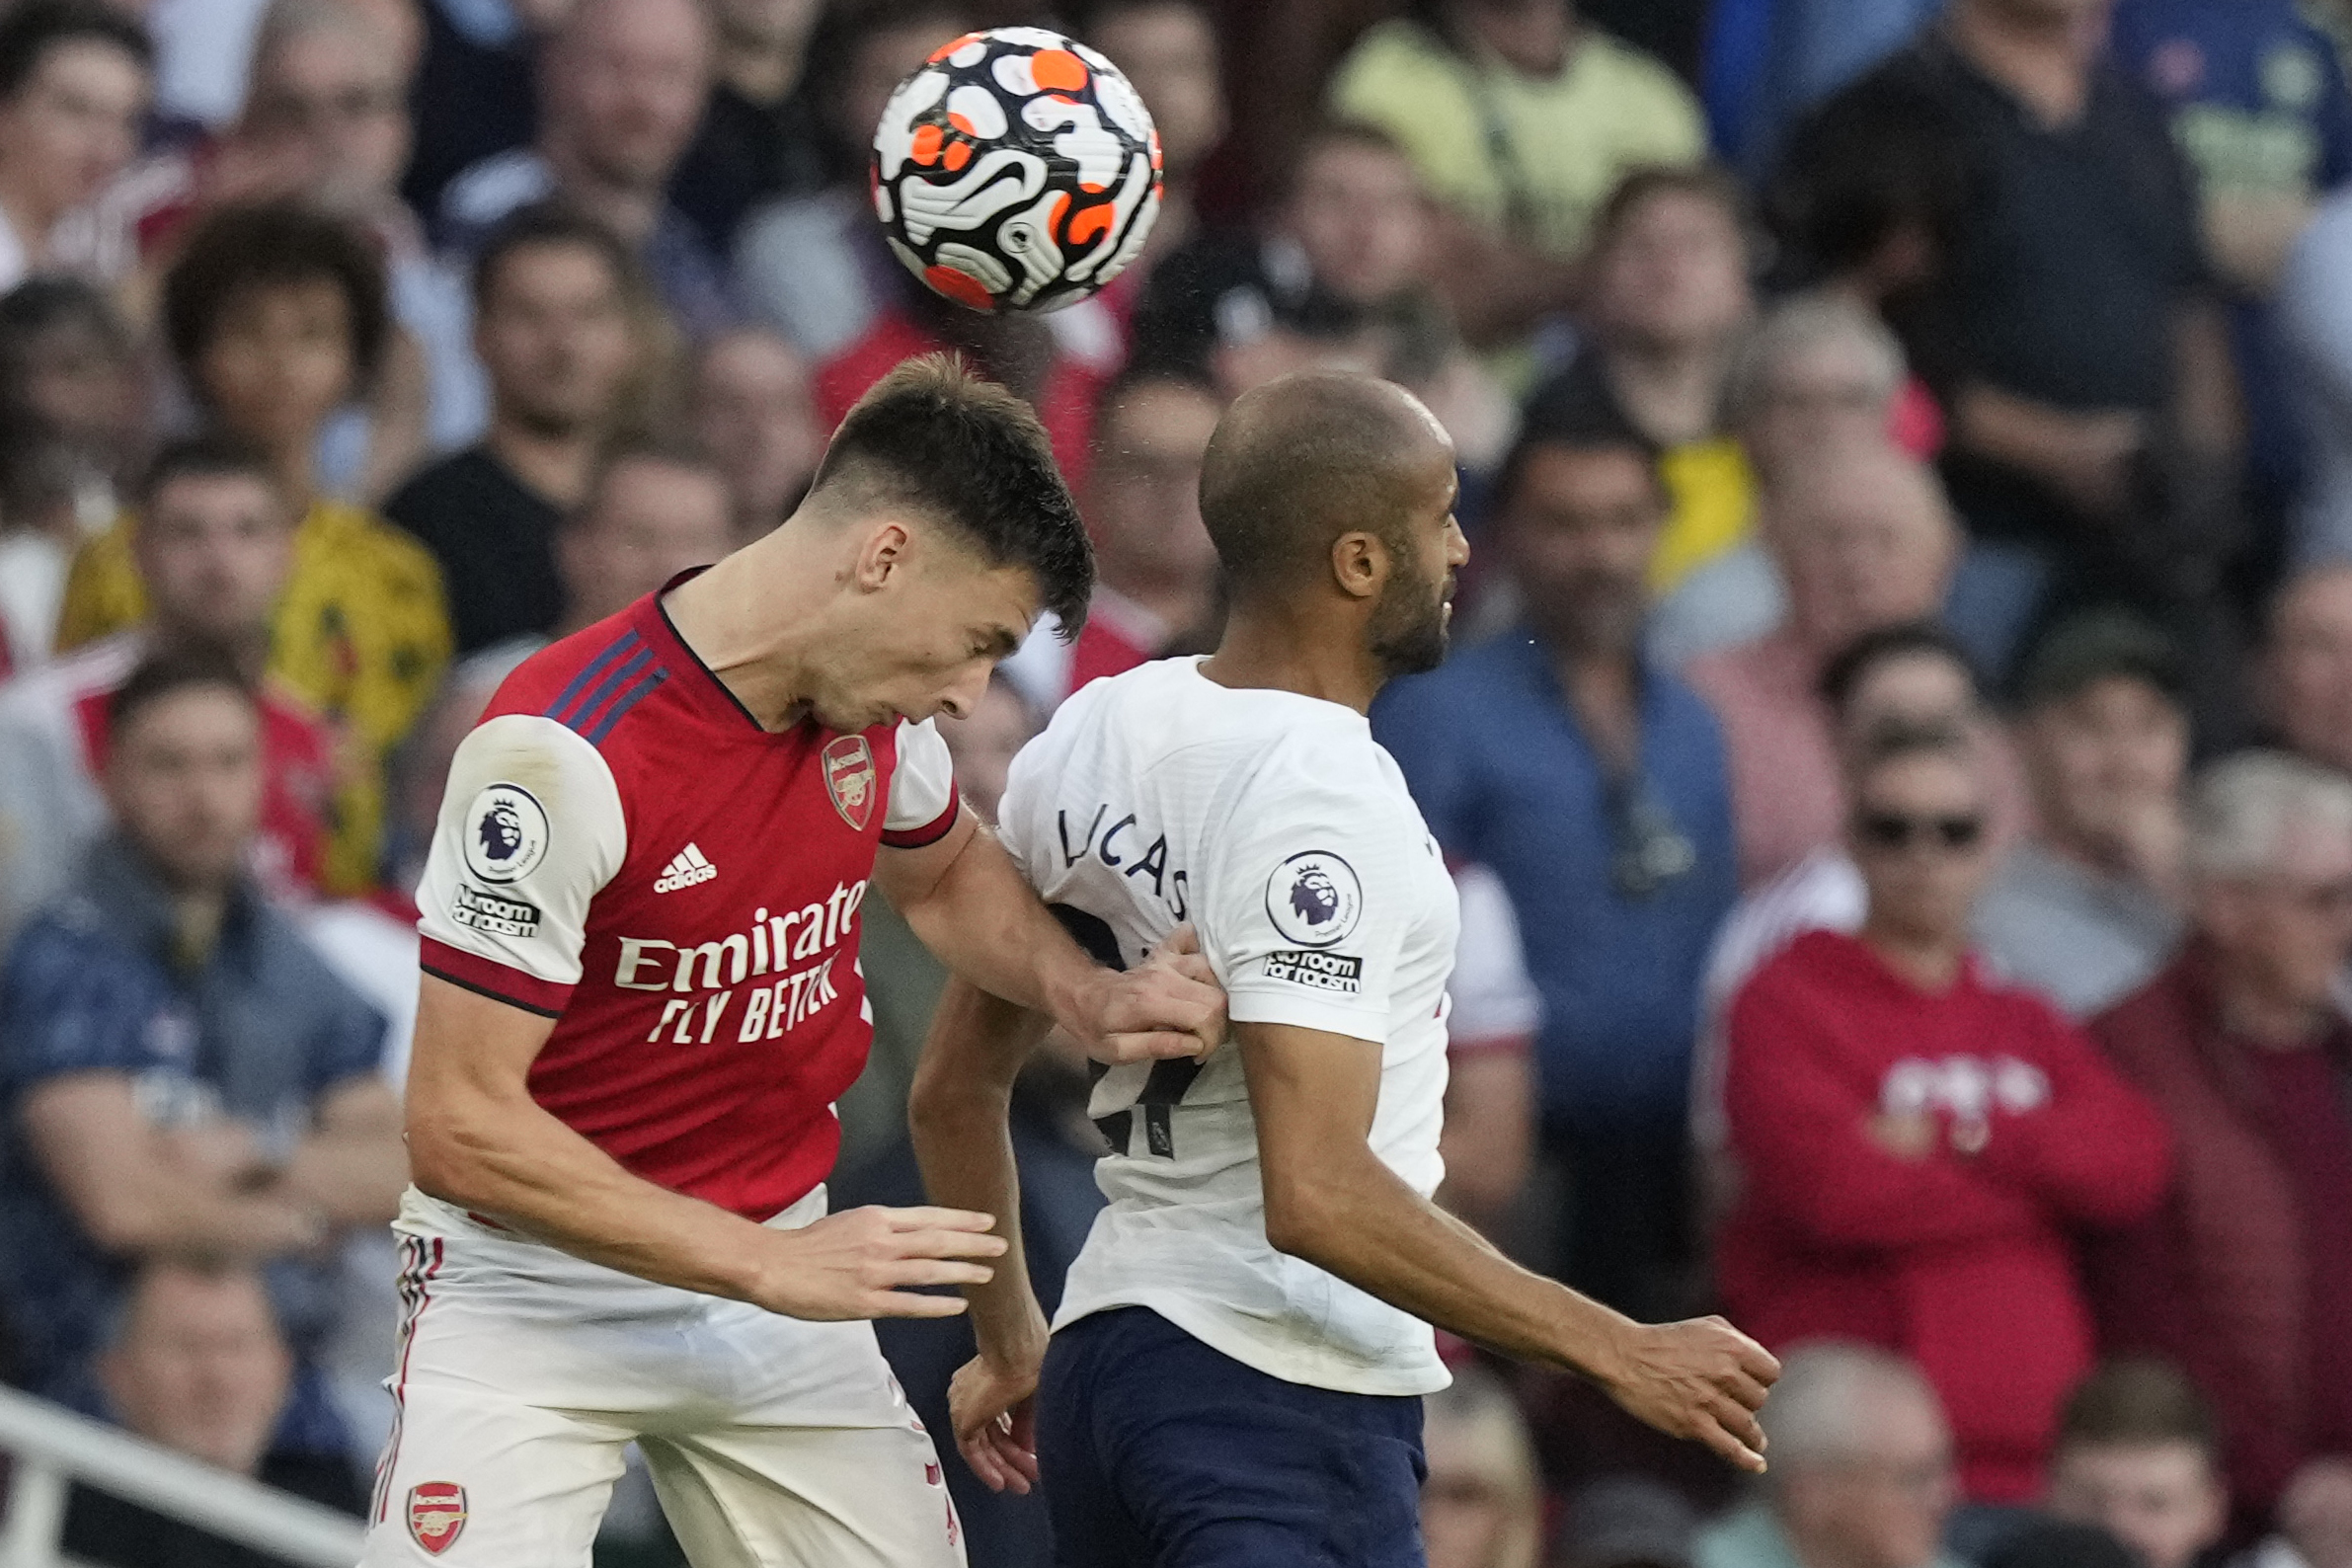 Arsenal-Tottenham live stream (5/12) How to watch Premier League online, TV, time